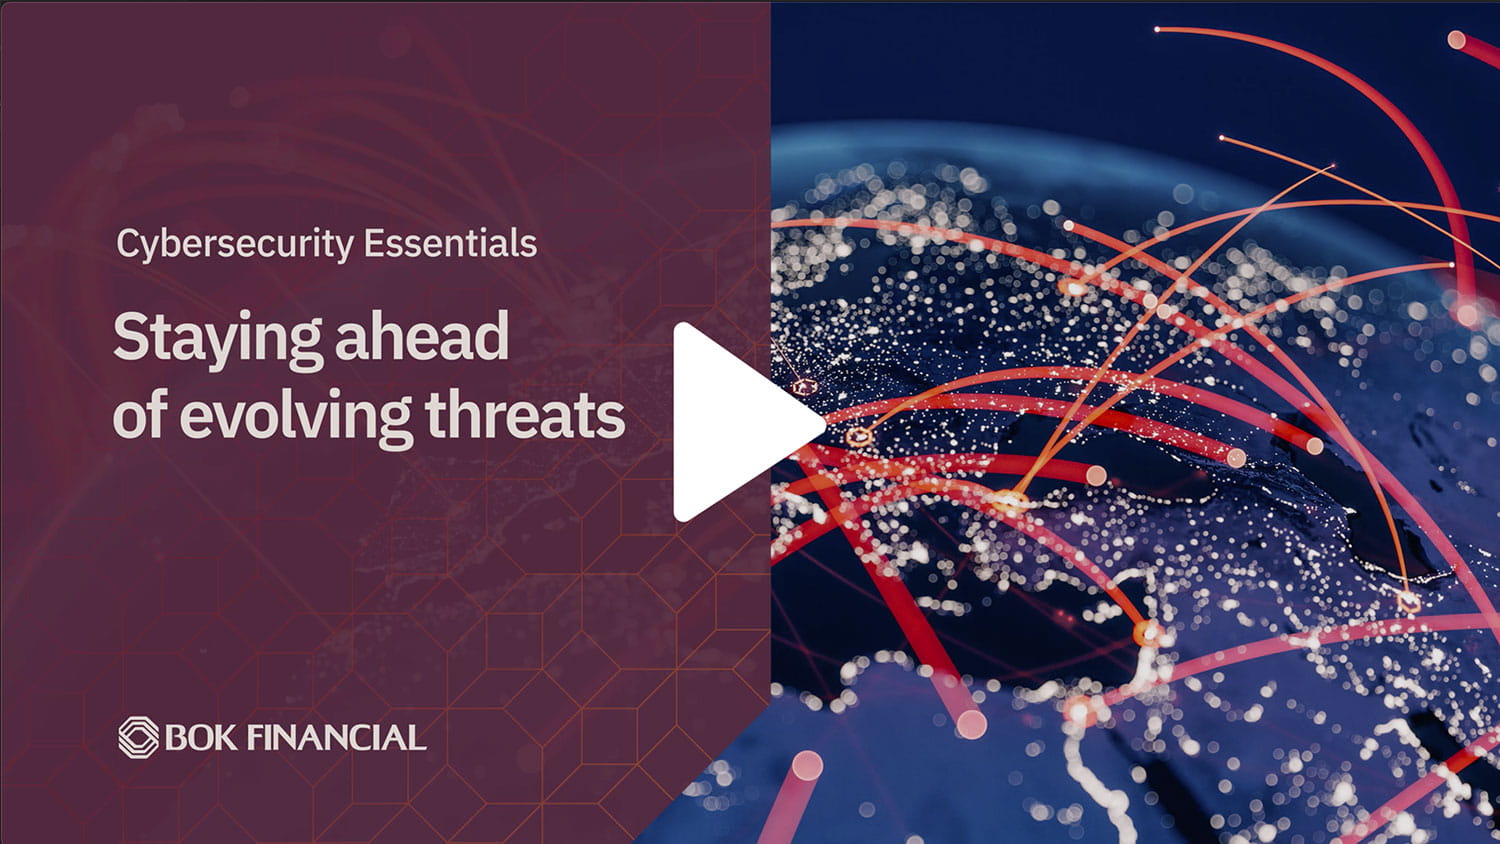 Graphic promoting video focused on "Staying ahead of evolving threats."